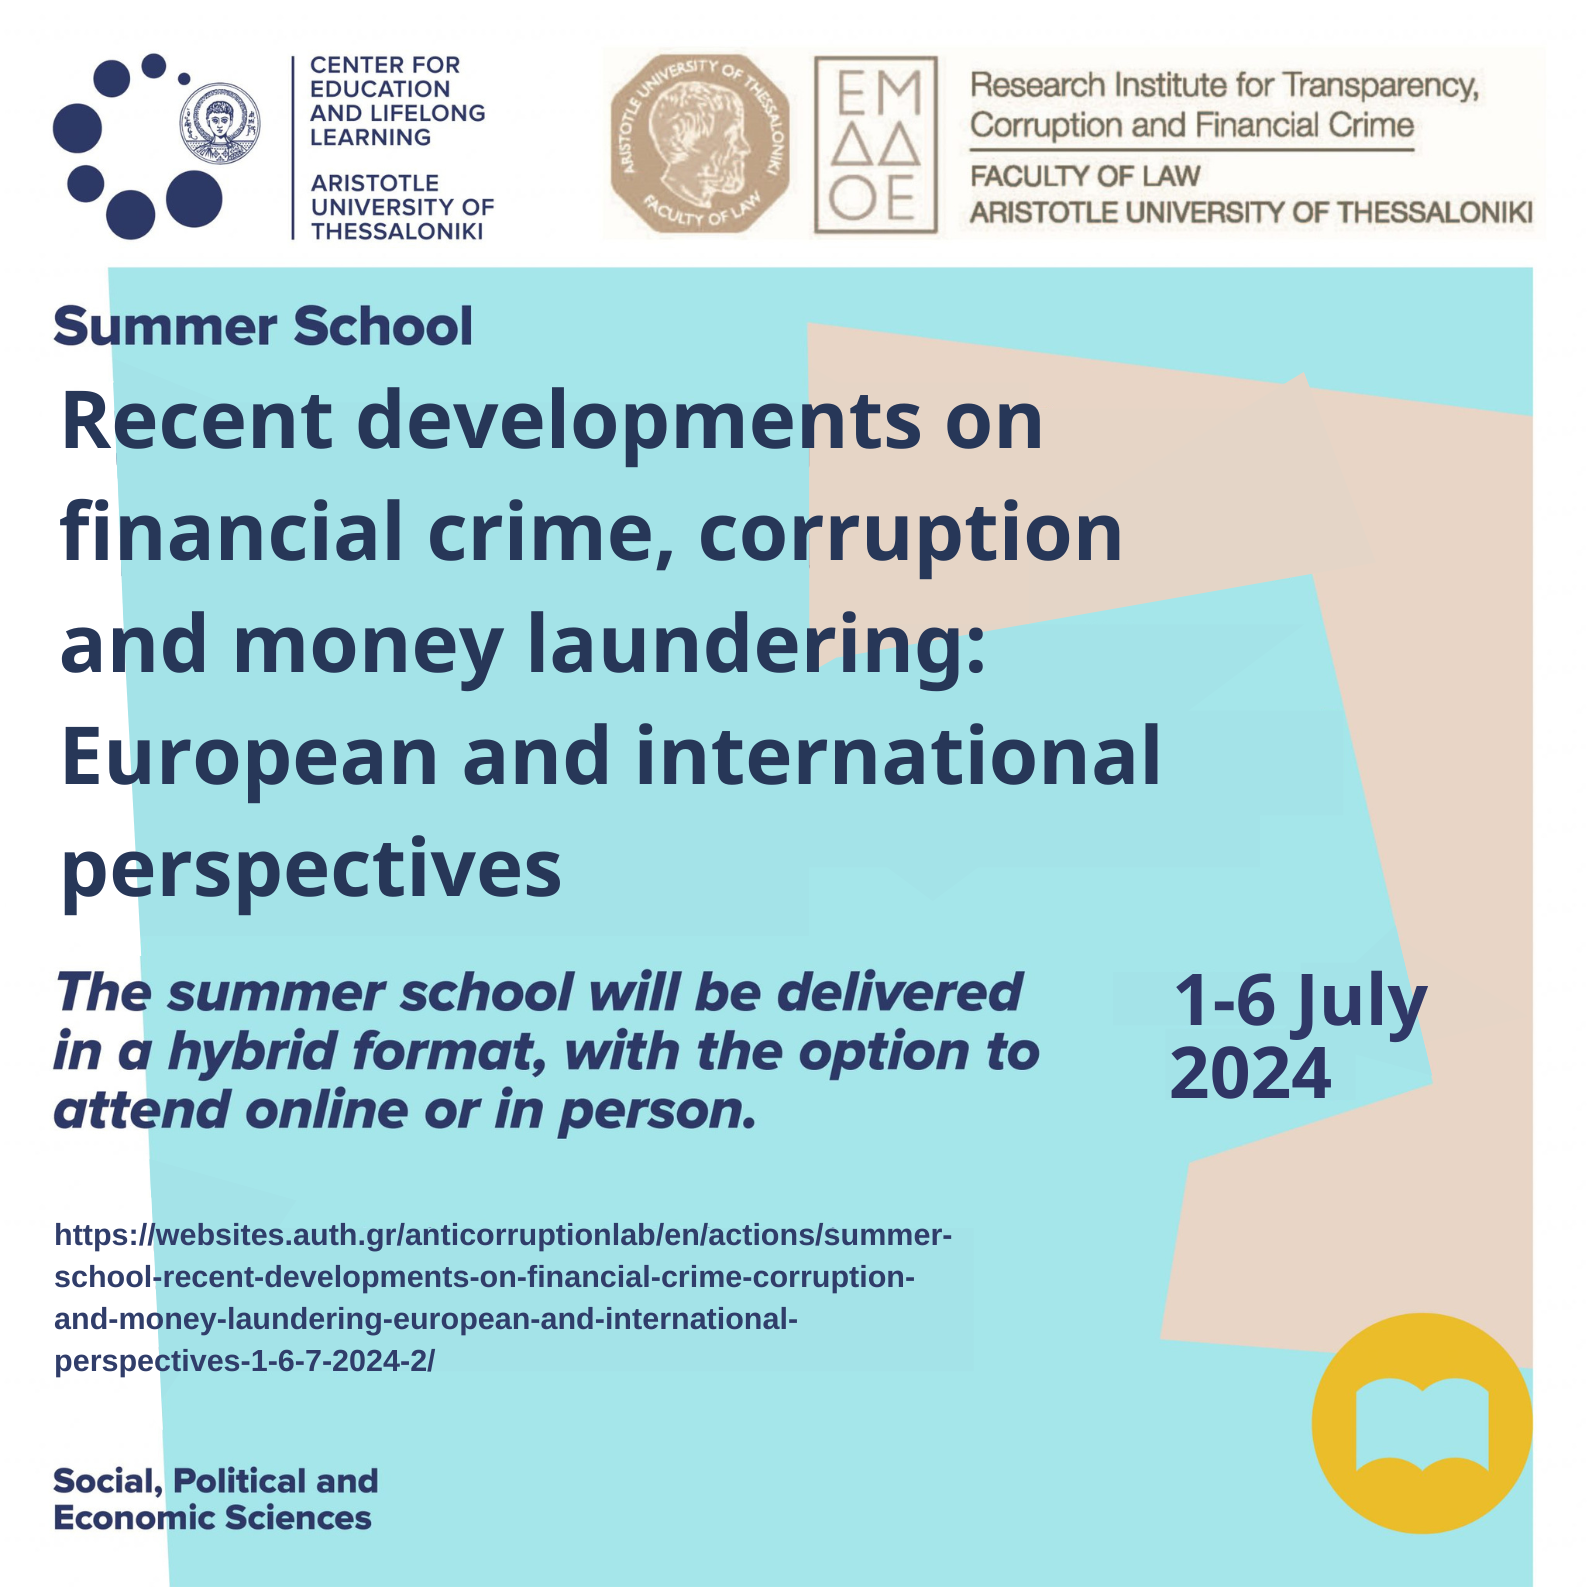 Summer school “Recent developments on financial crime, corruption and money laundering: European and international perspectives”, 1-6/7/2024